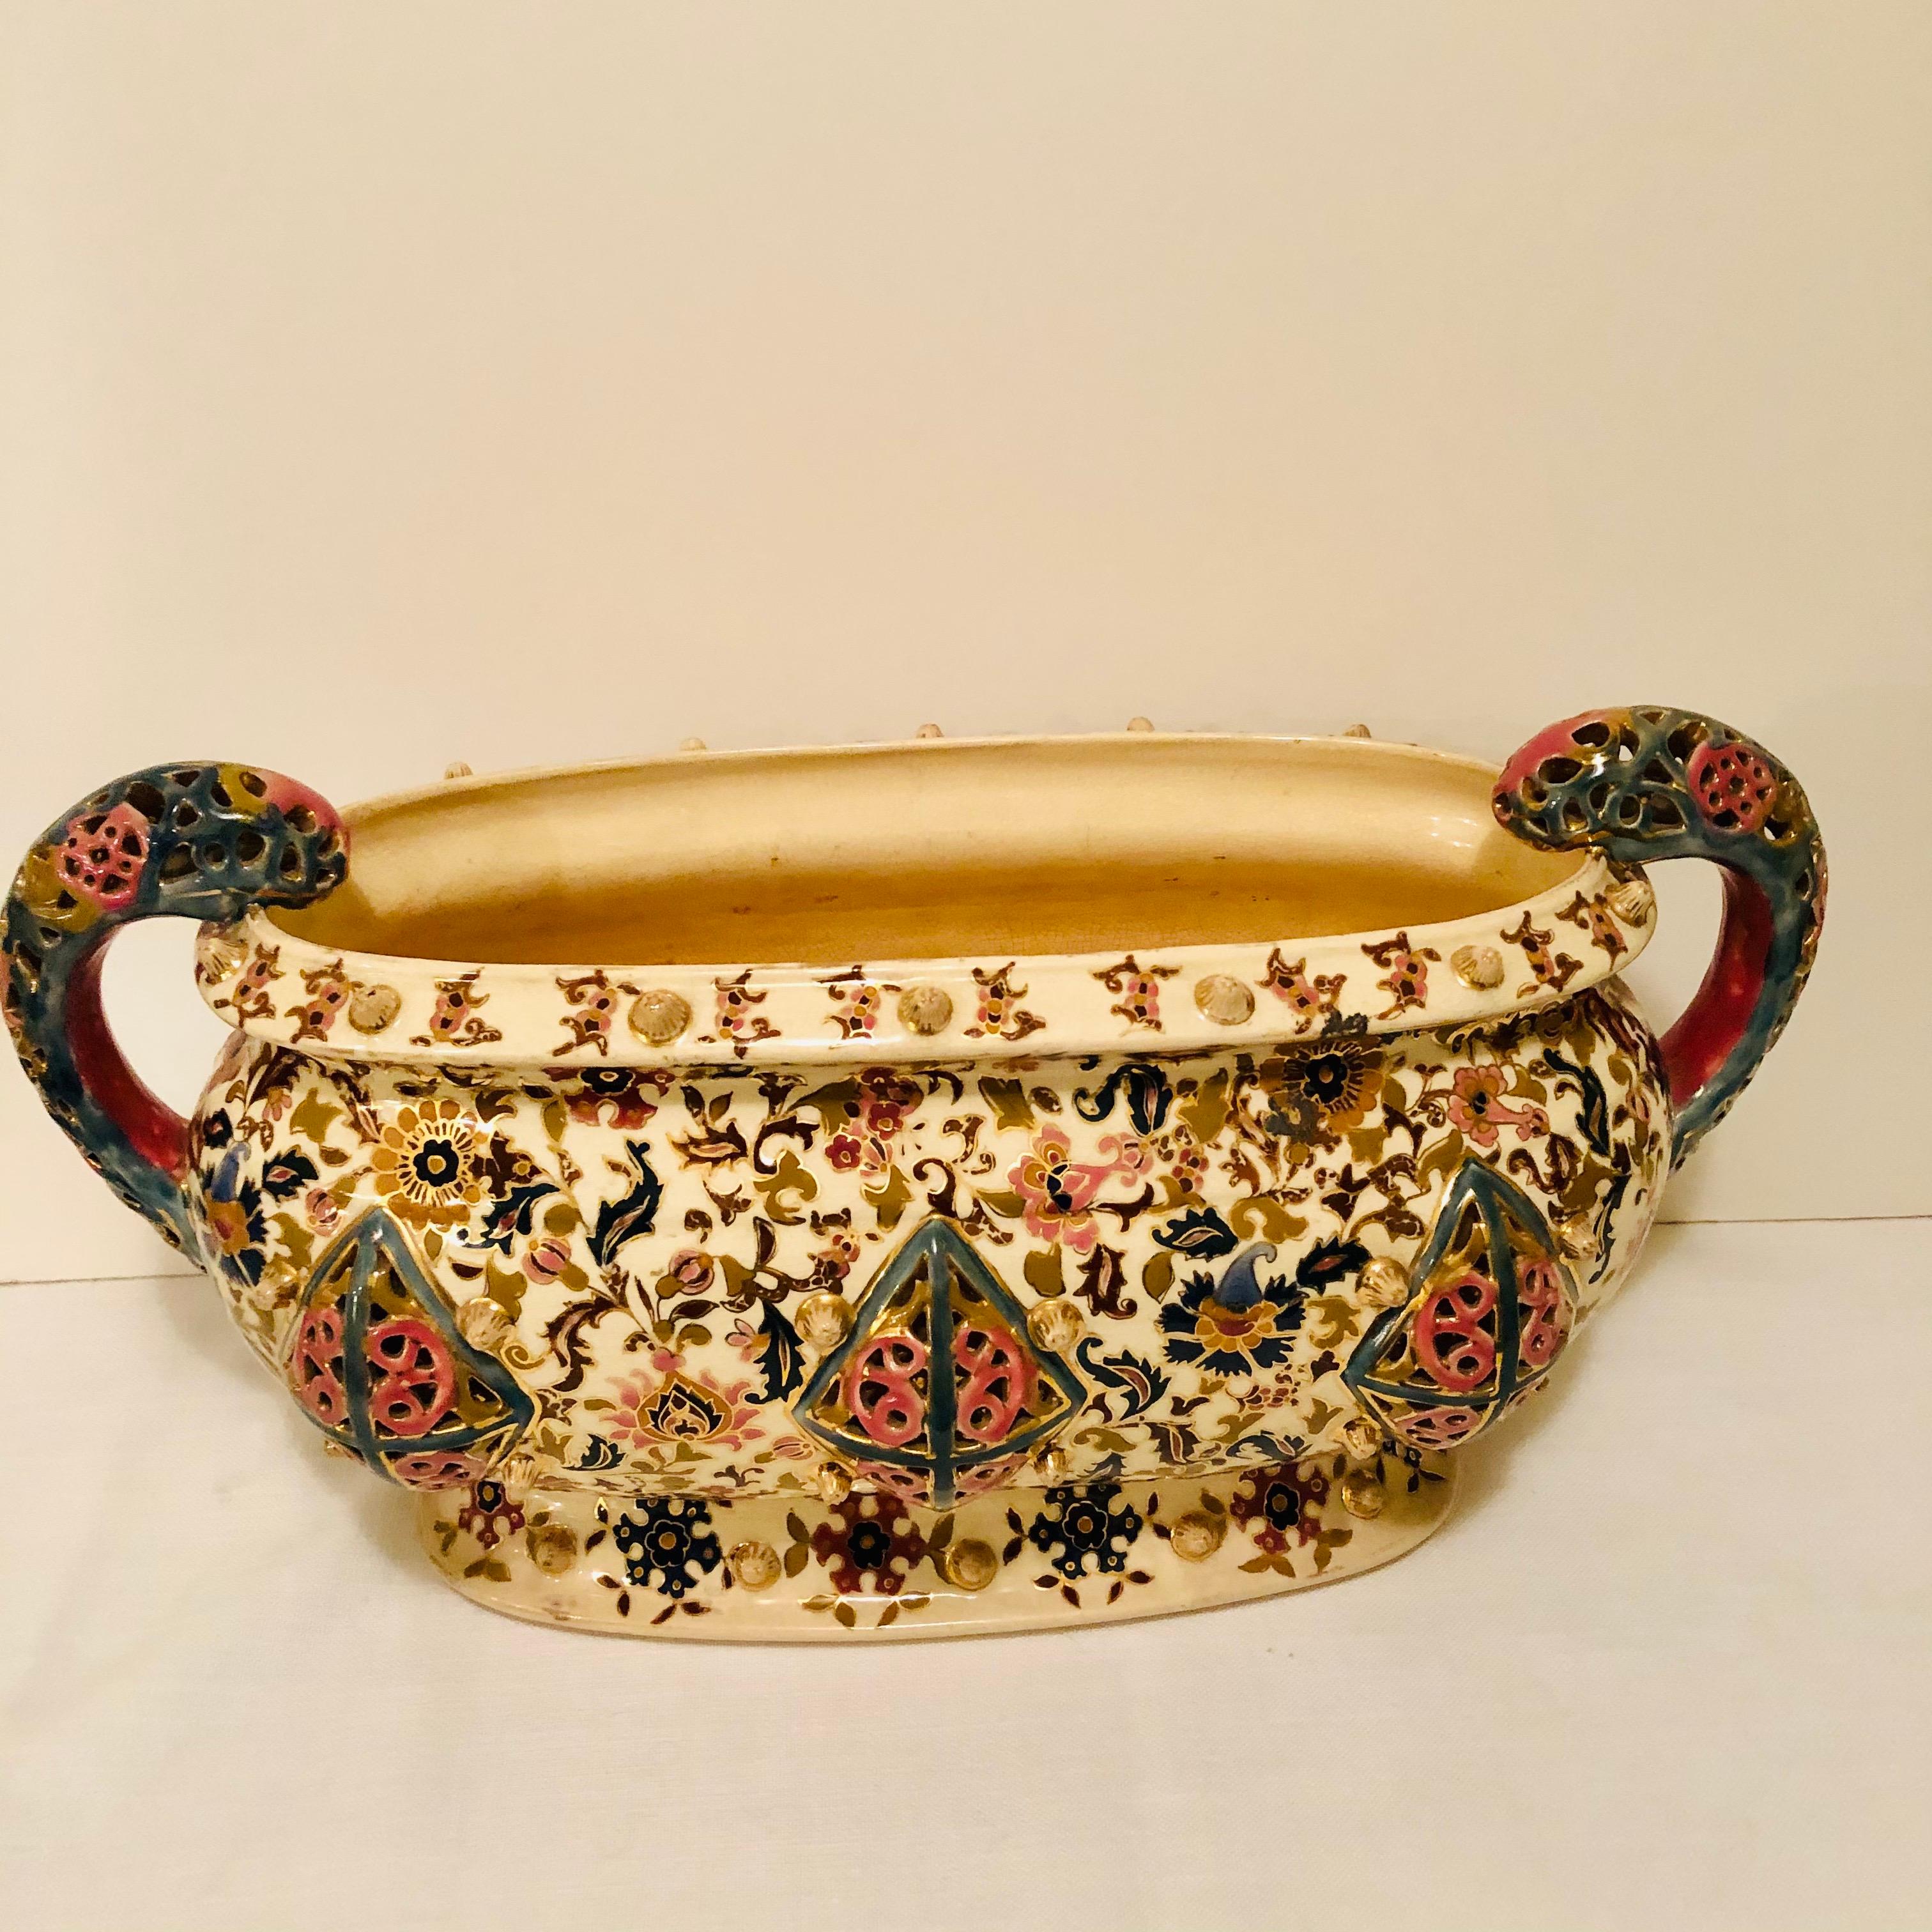 Very rare large Fischer Budapest centerpiece or jardinière painted with intricate bright colored decoration. It has reticulated colorful handles and three panels of reticulation with pink and green edges on the front and the back. It is very